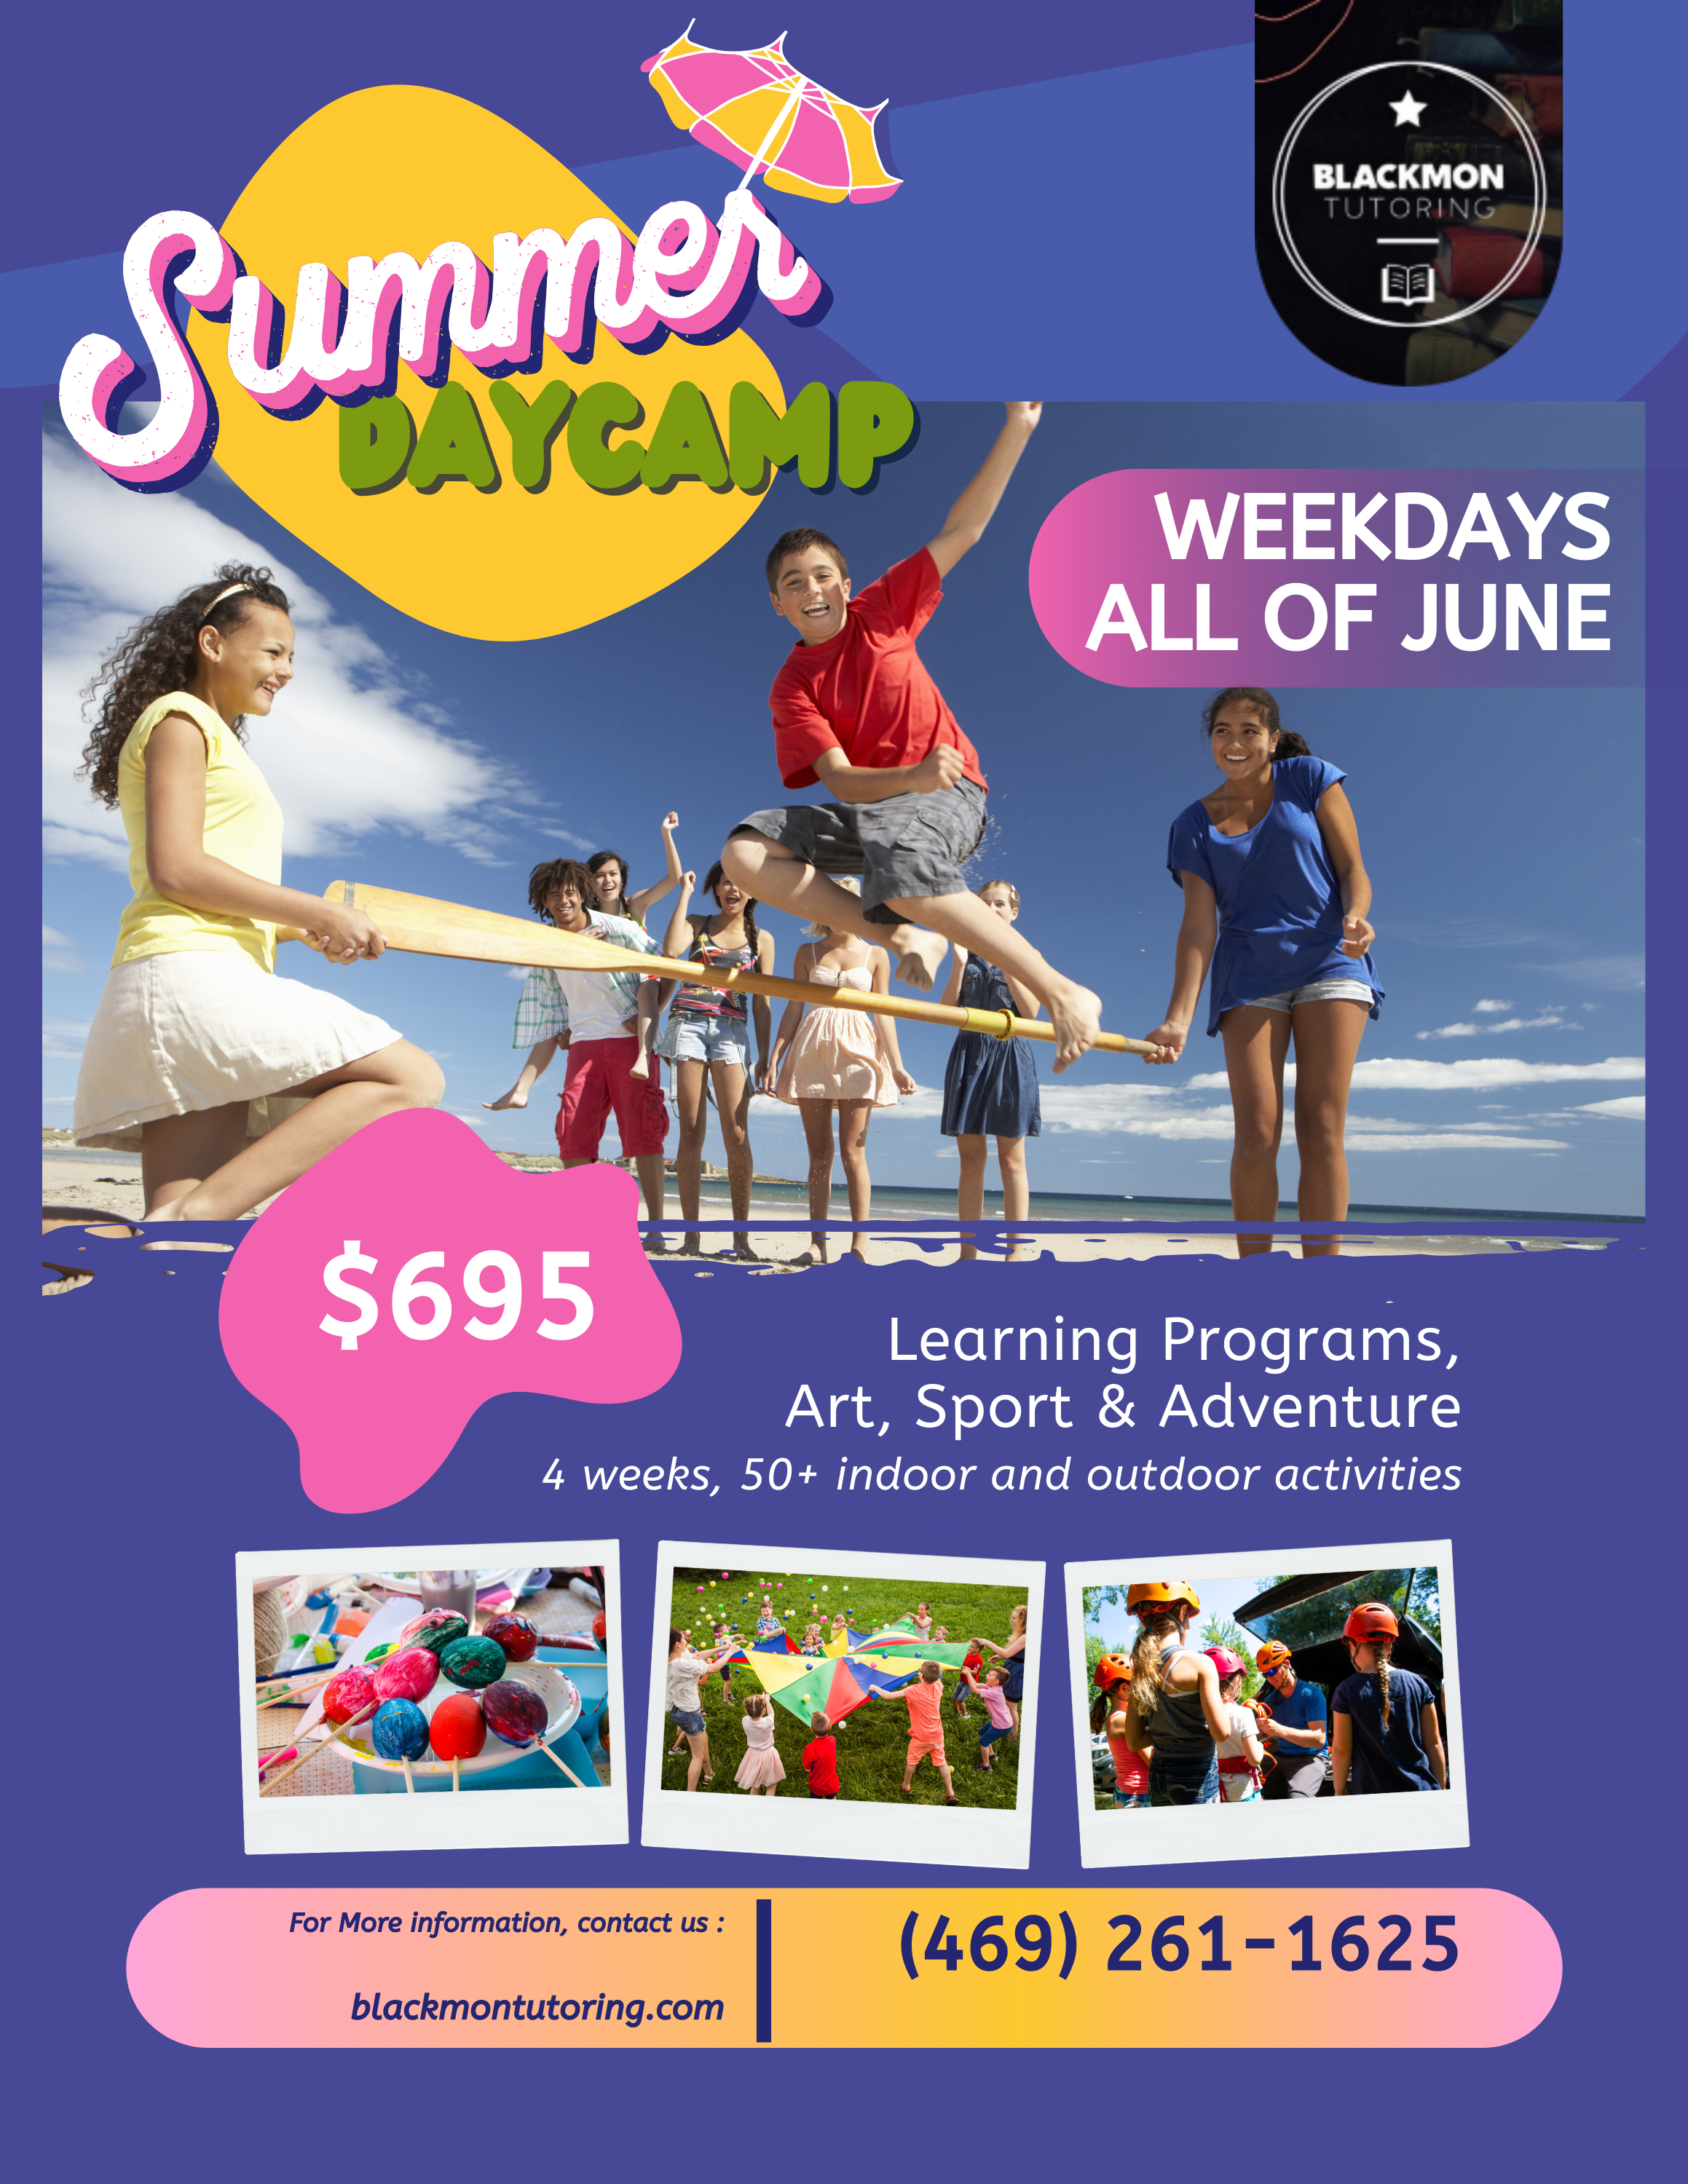 Frisco Texas Kids and Teens Summer Program for great price!